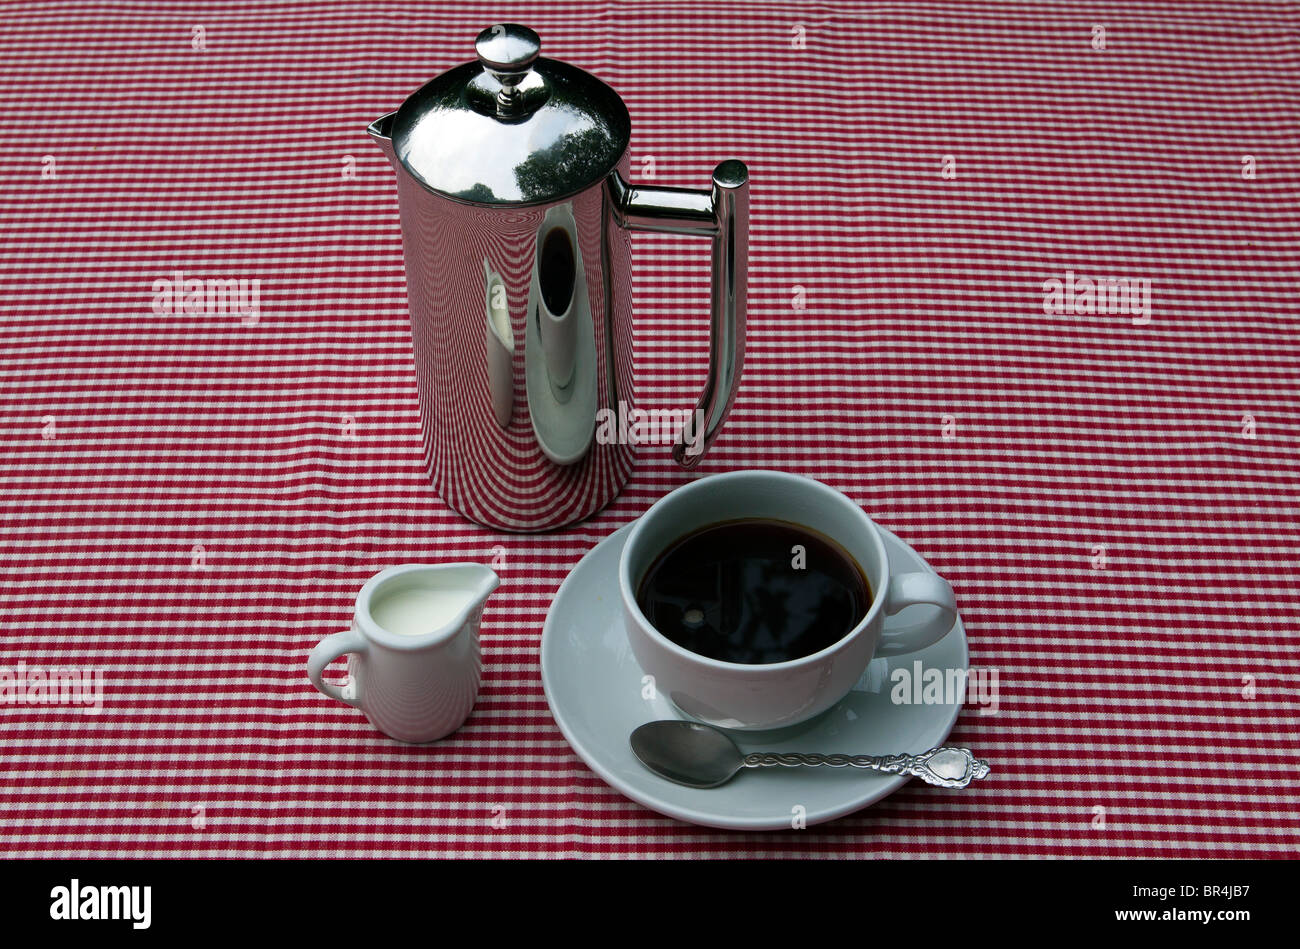 https://c8.alamy.com/comp/BR4JB7/a-shiny-coffee-pot-and-cups-and-saucers-on-a-red-and-white-tablecloth-BR4JB7.jpg